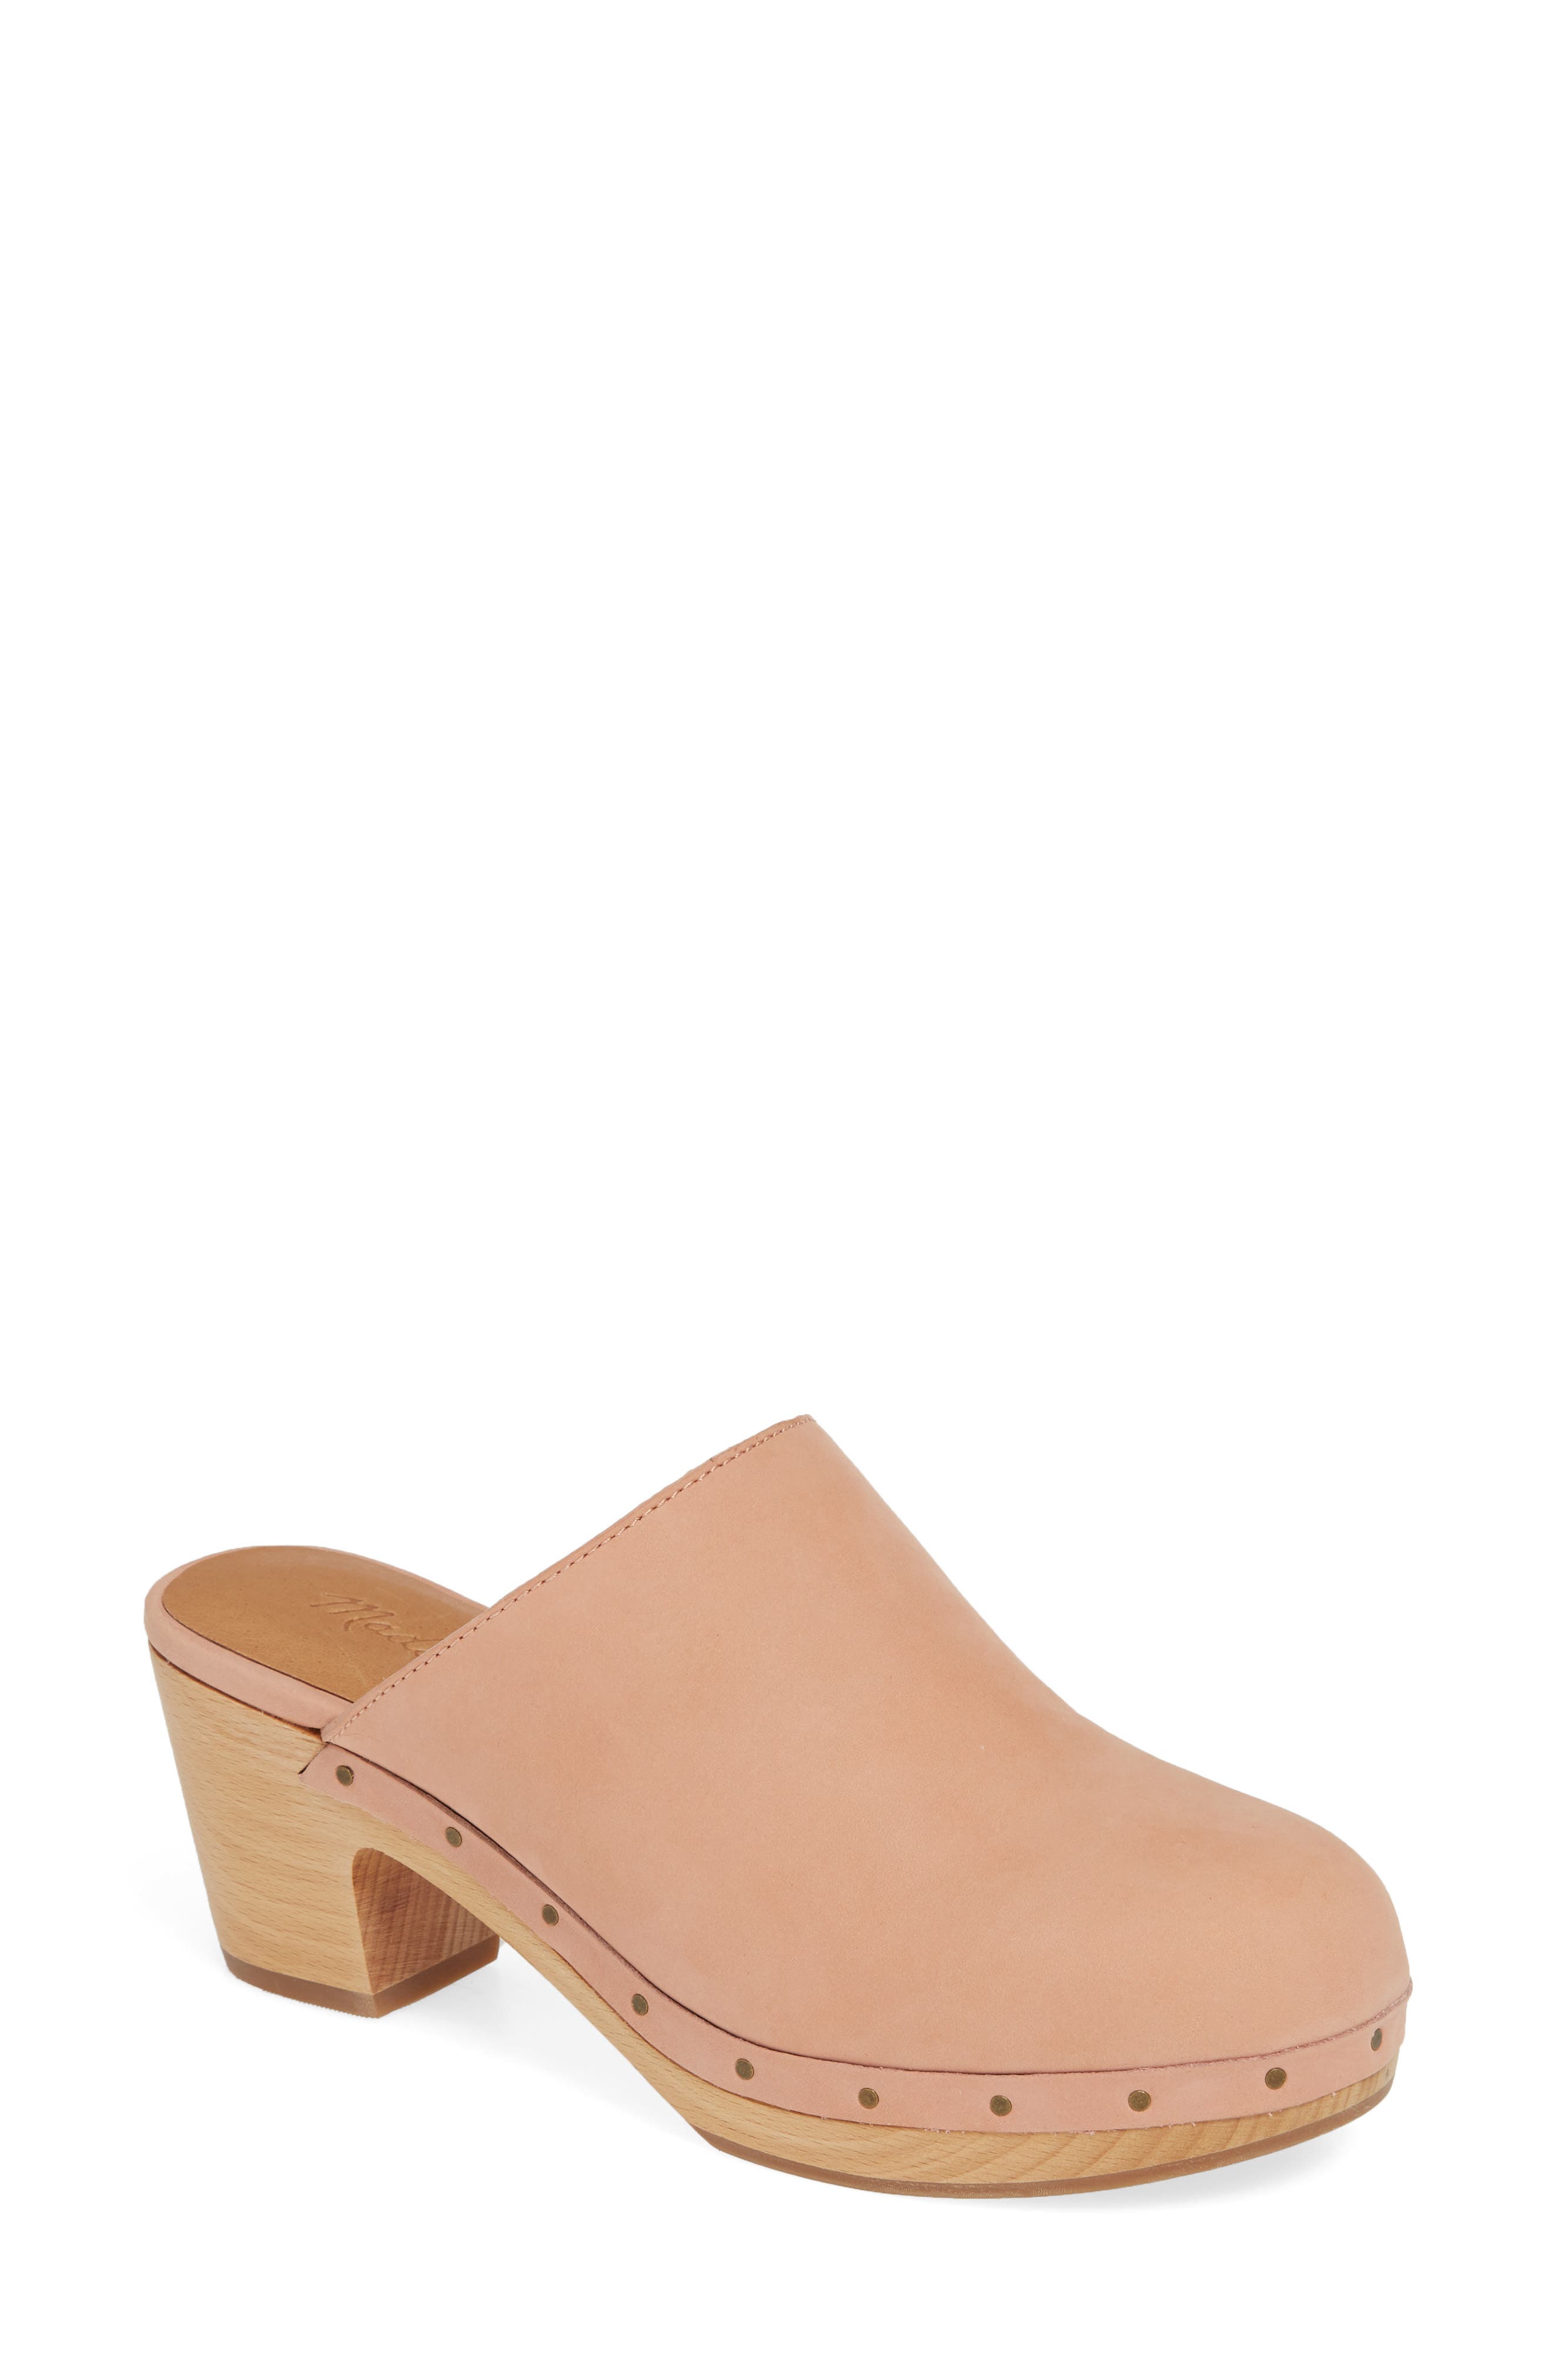 The Ayanna Leather Clog | Nordstrom Rack